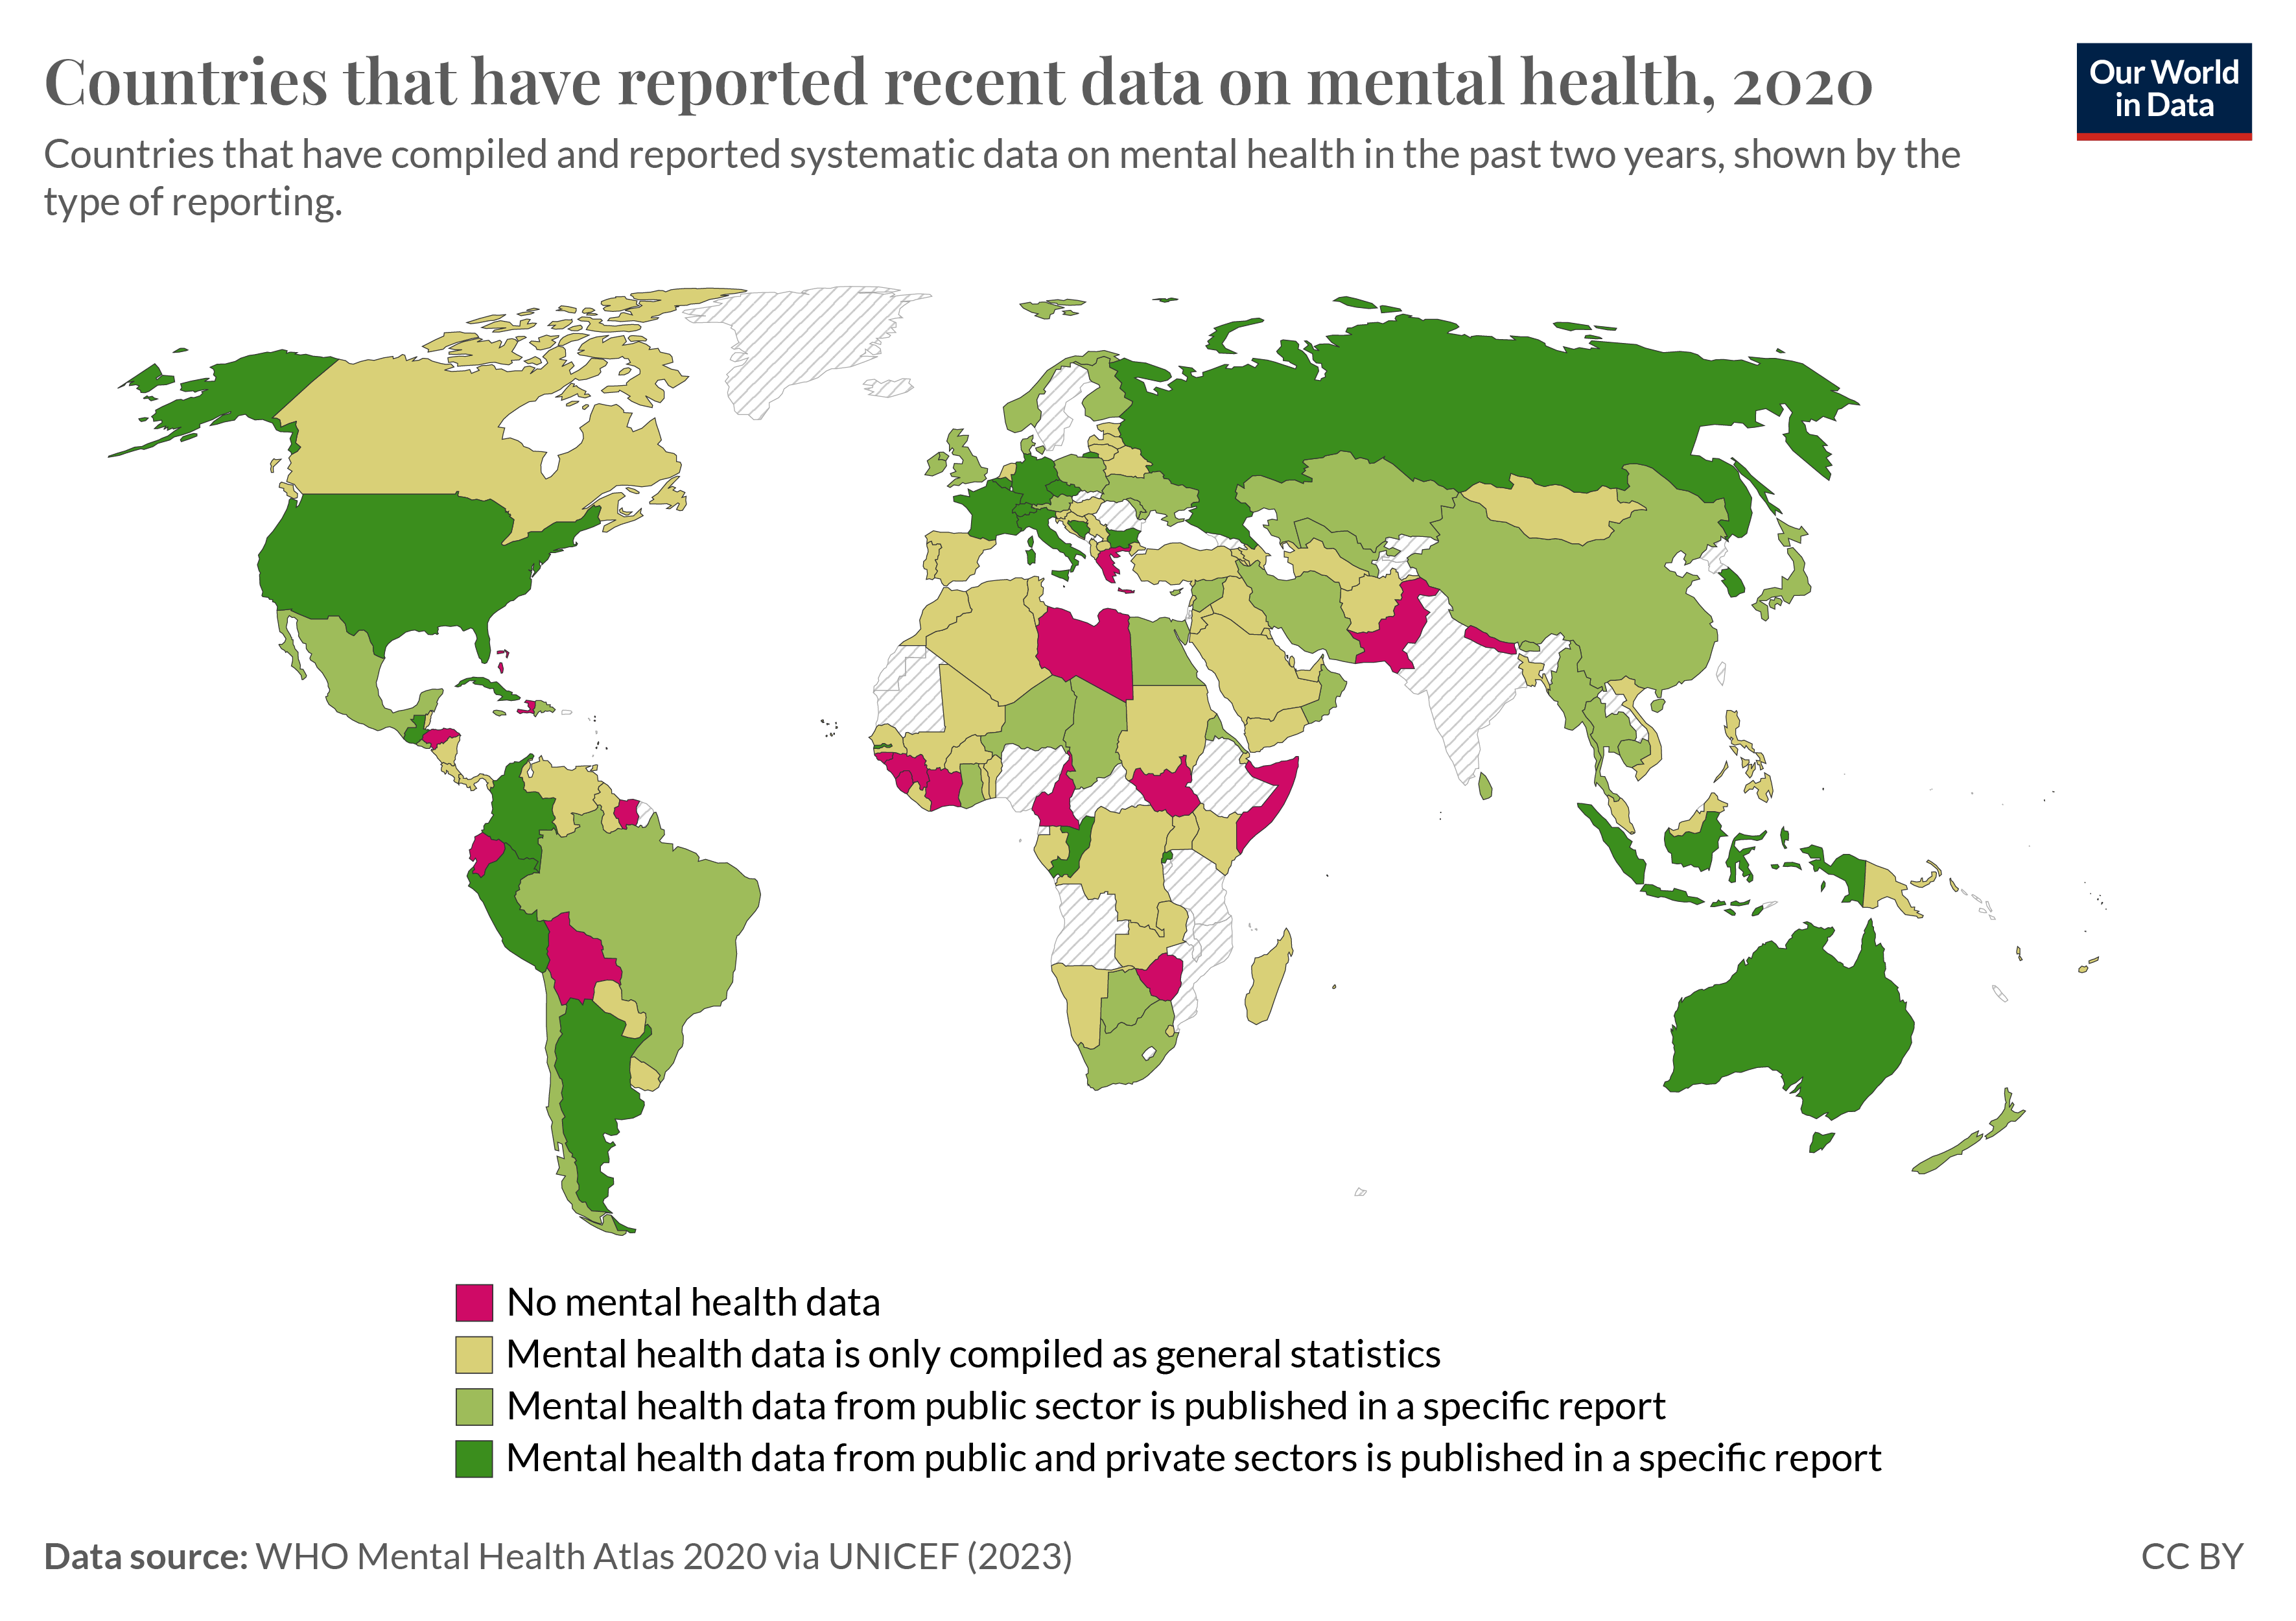 This map, titled "Countries that have reported recent data on mental health, 2020," illustrates the reporting status of countries that have compiled and reported systematic data on mental health in the past two years. The map uses different colors to indicate the type of reporting.
The data source is the WHO Mental Health Atlas 2020 via UNICEF (2023). The map shows a diverse reporting landscape, with many countries in North America, Europe, and parts of Asia and Australia providing specific reports for public and private sectors. In contrast, several countries in Africa and parts of Asia and South America have either no mental health data or did not respond to the WHO survey.